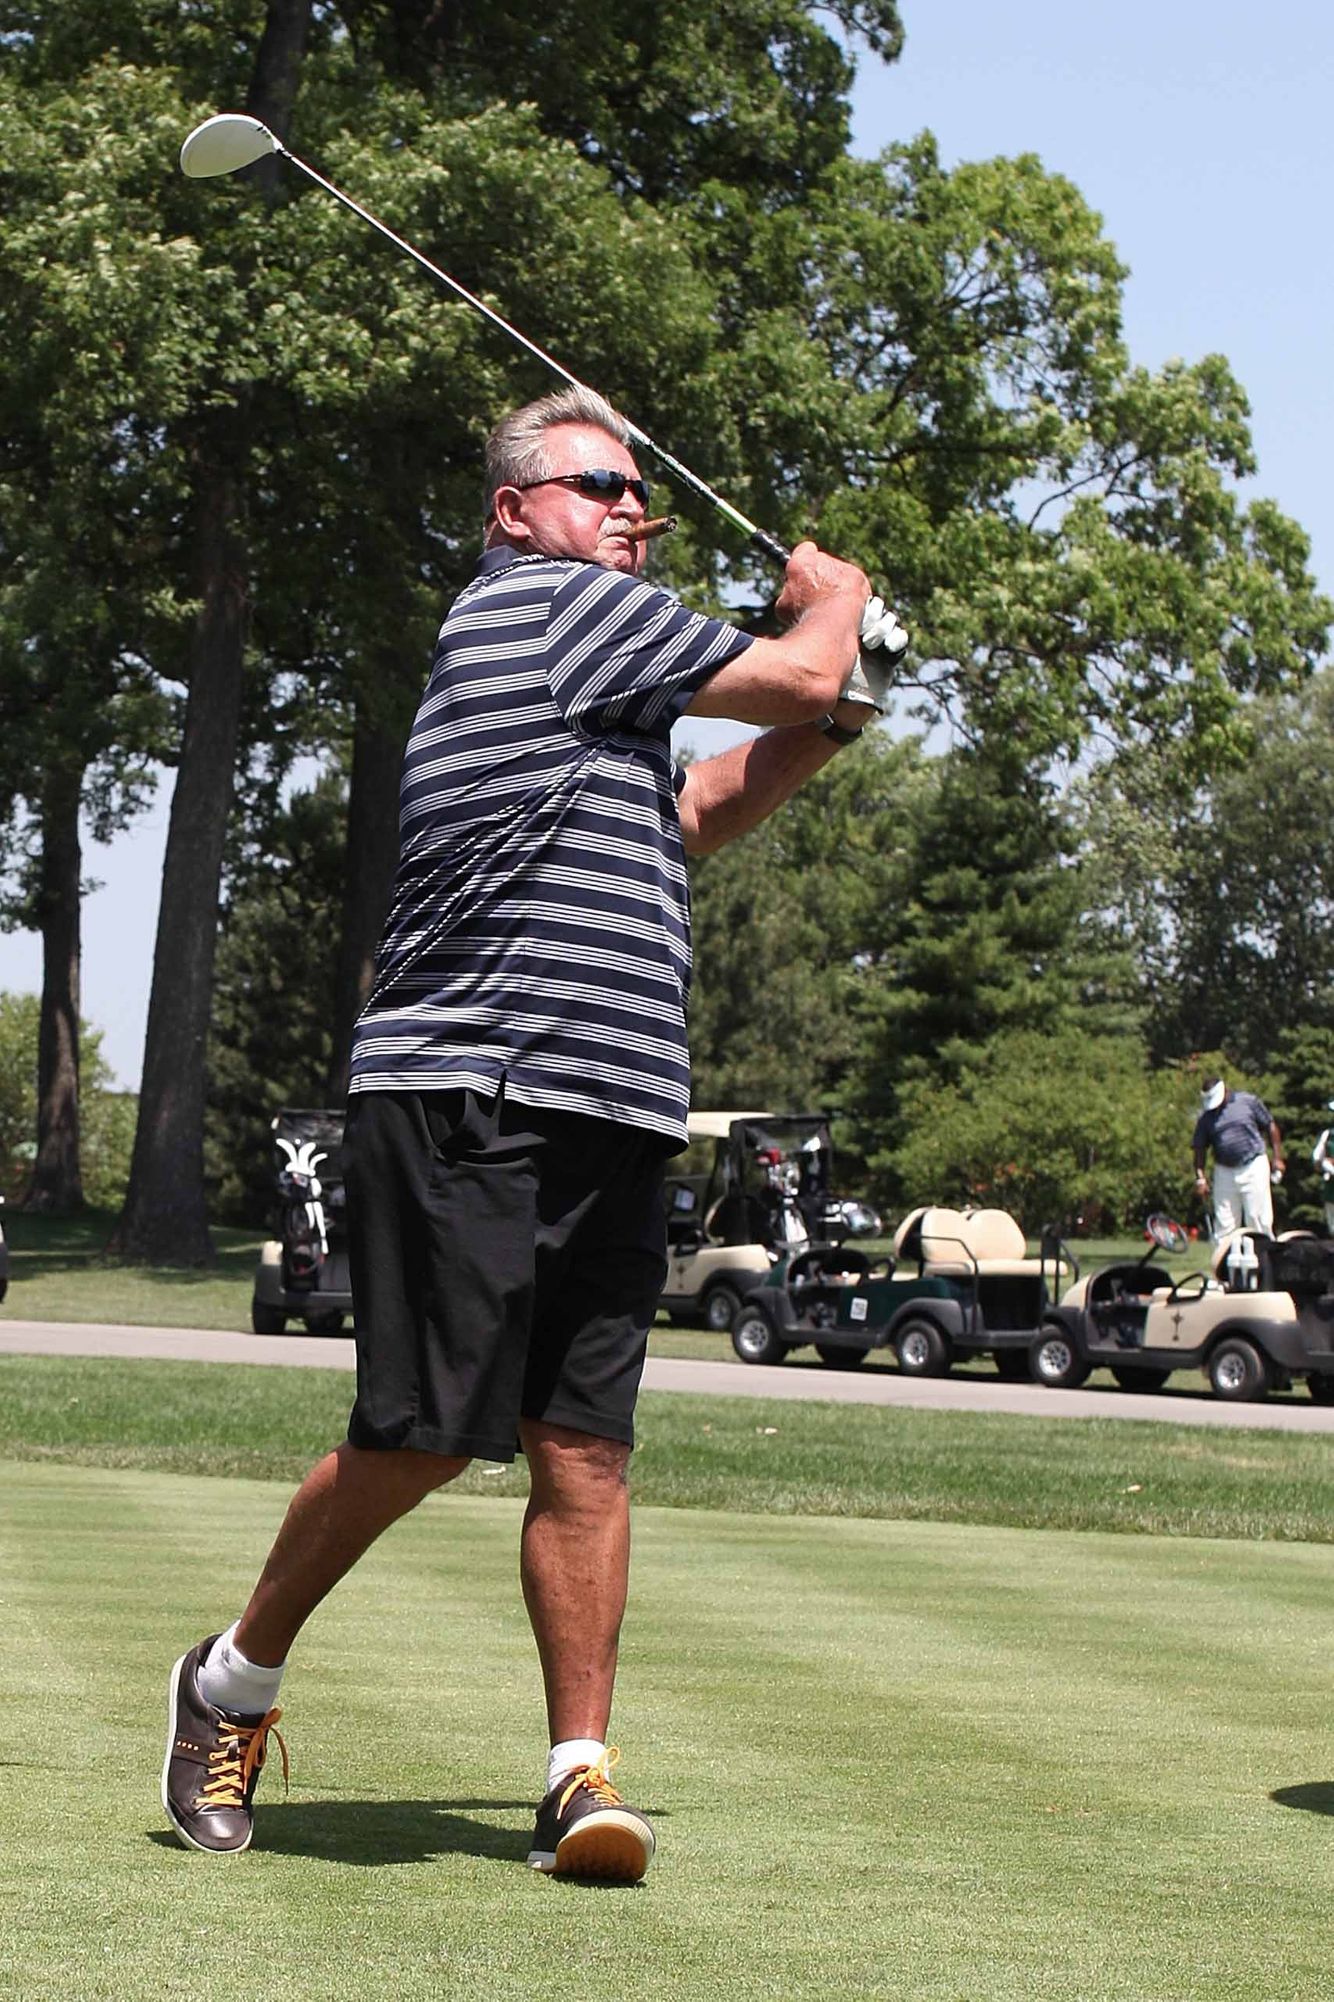 Mike Ditka By Chicago Celebrity Entertainment Event Photographer Jeff Schear